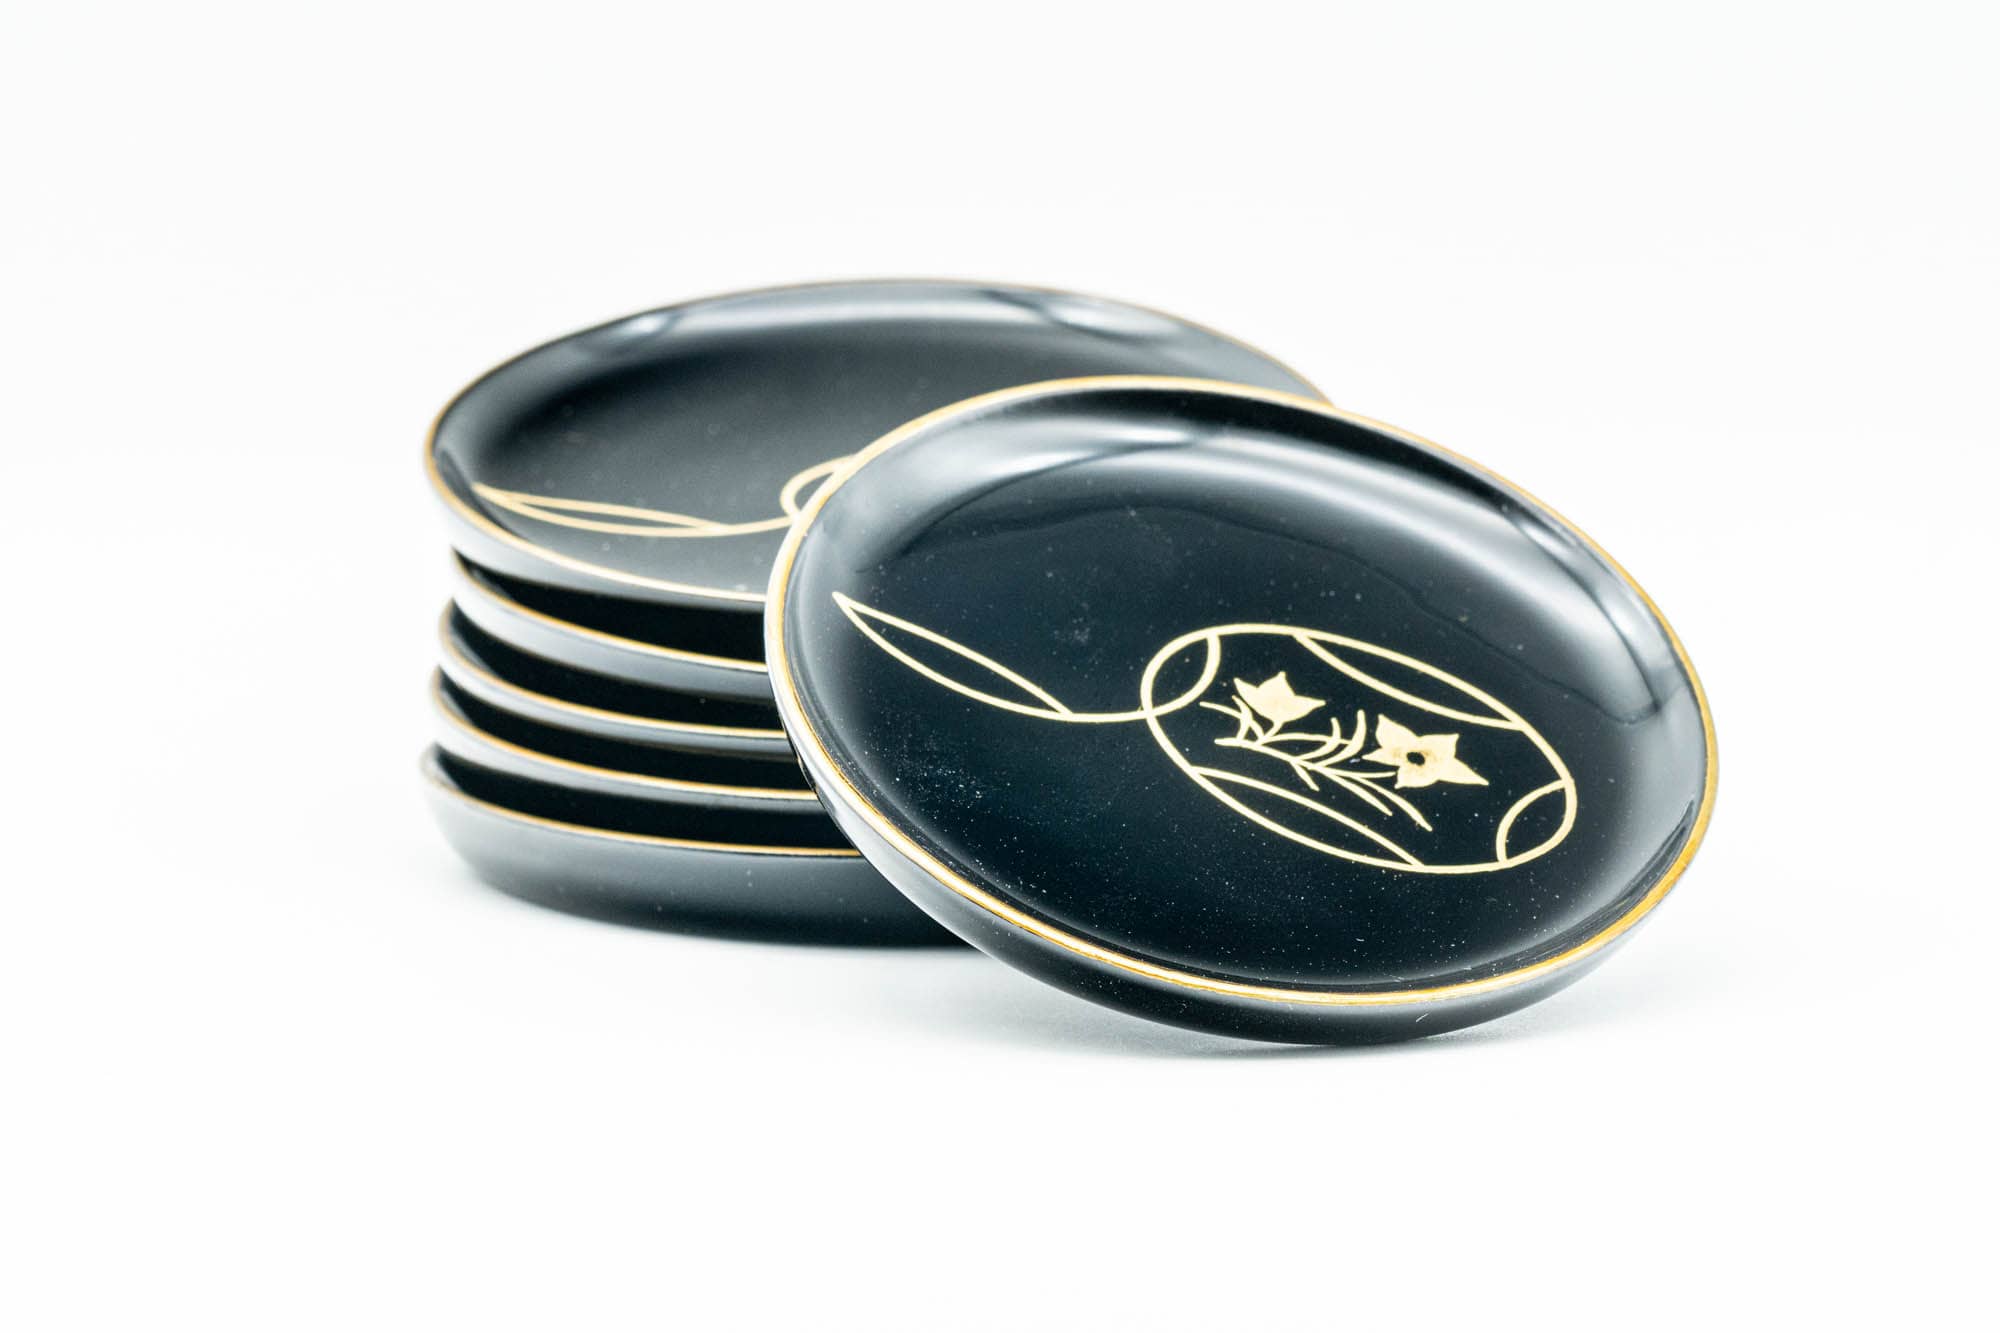 Japanese Chataku - Set of 6 Black Lacquer Tea Saucers in Caddy and Wooden Box